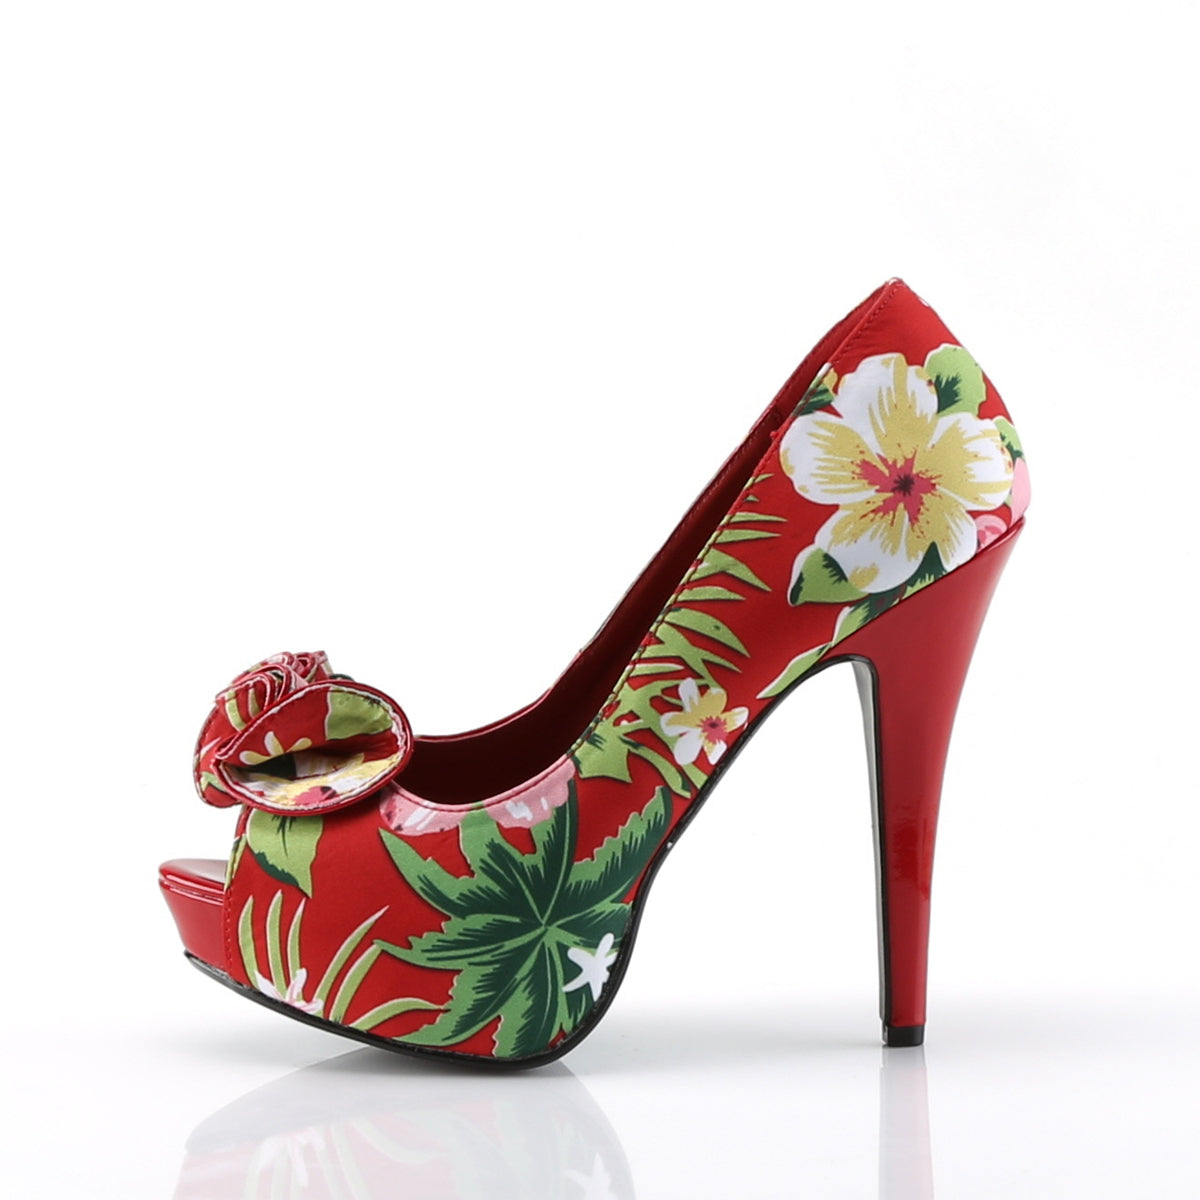 LOLITA-11 Pin Up 5" Heel Red Floral Retro Pin Up Shoes-Pin Up Couture- Sexy Shoes Pole Dance Heels